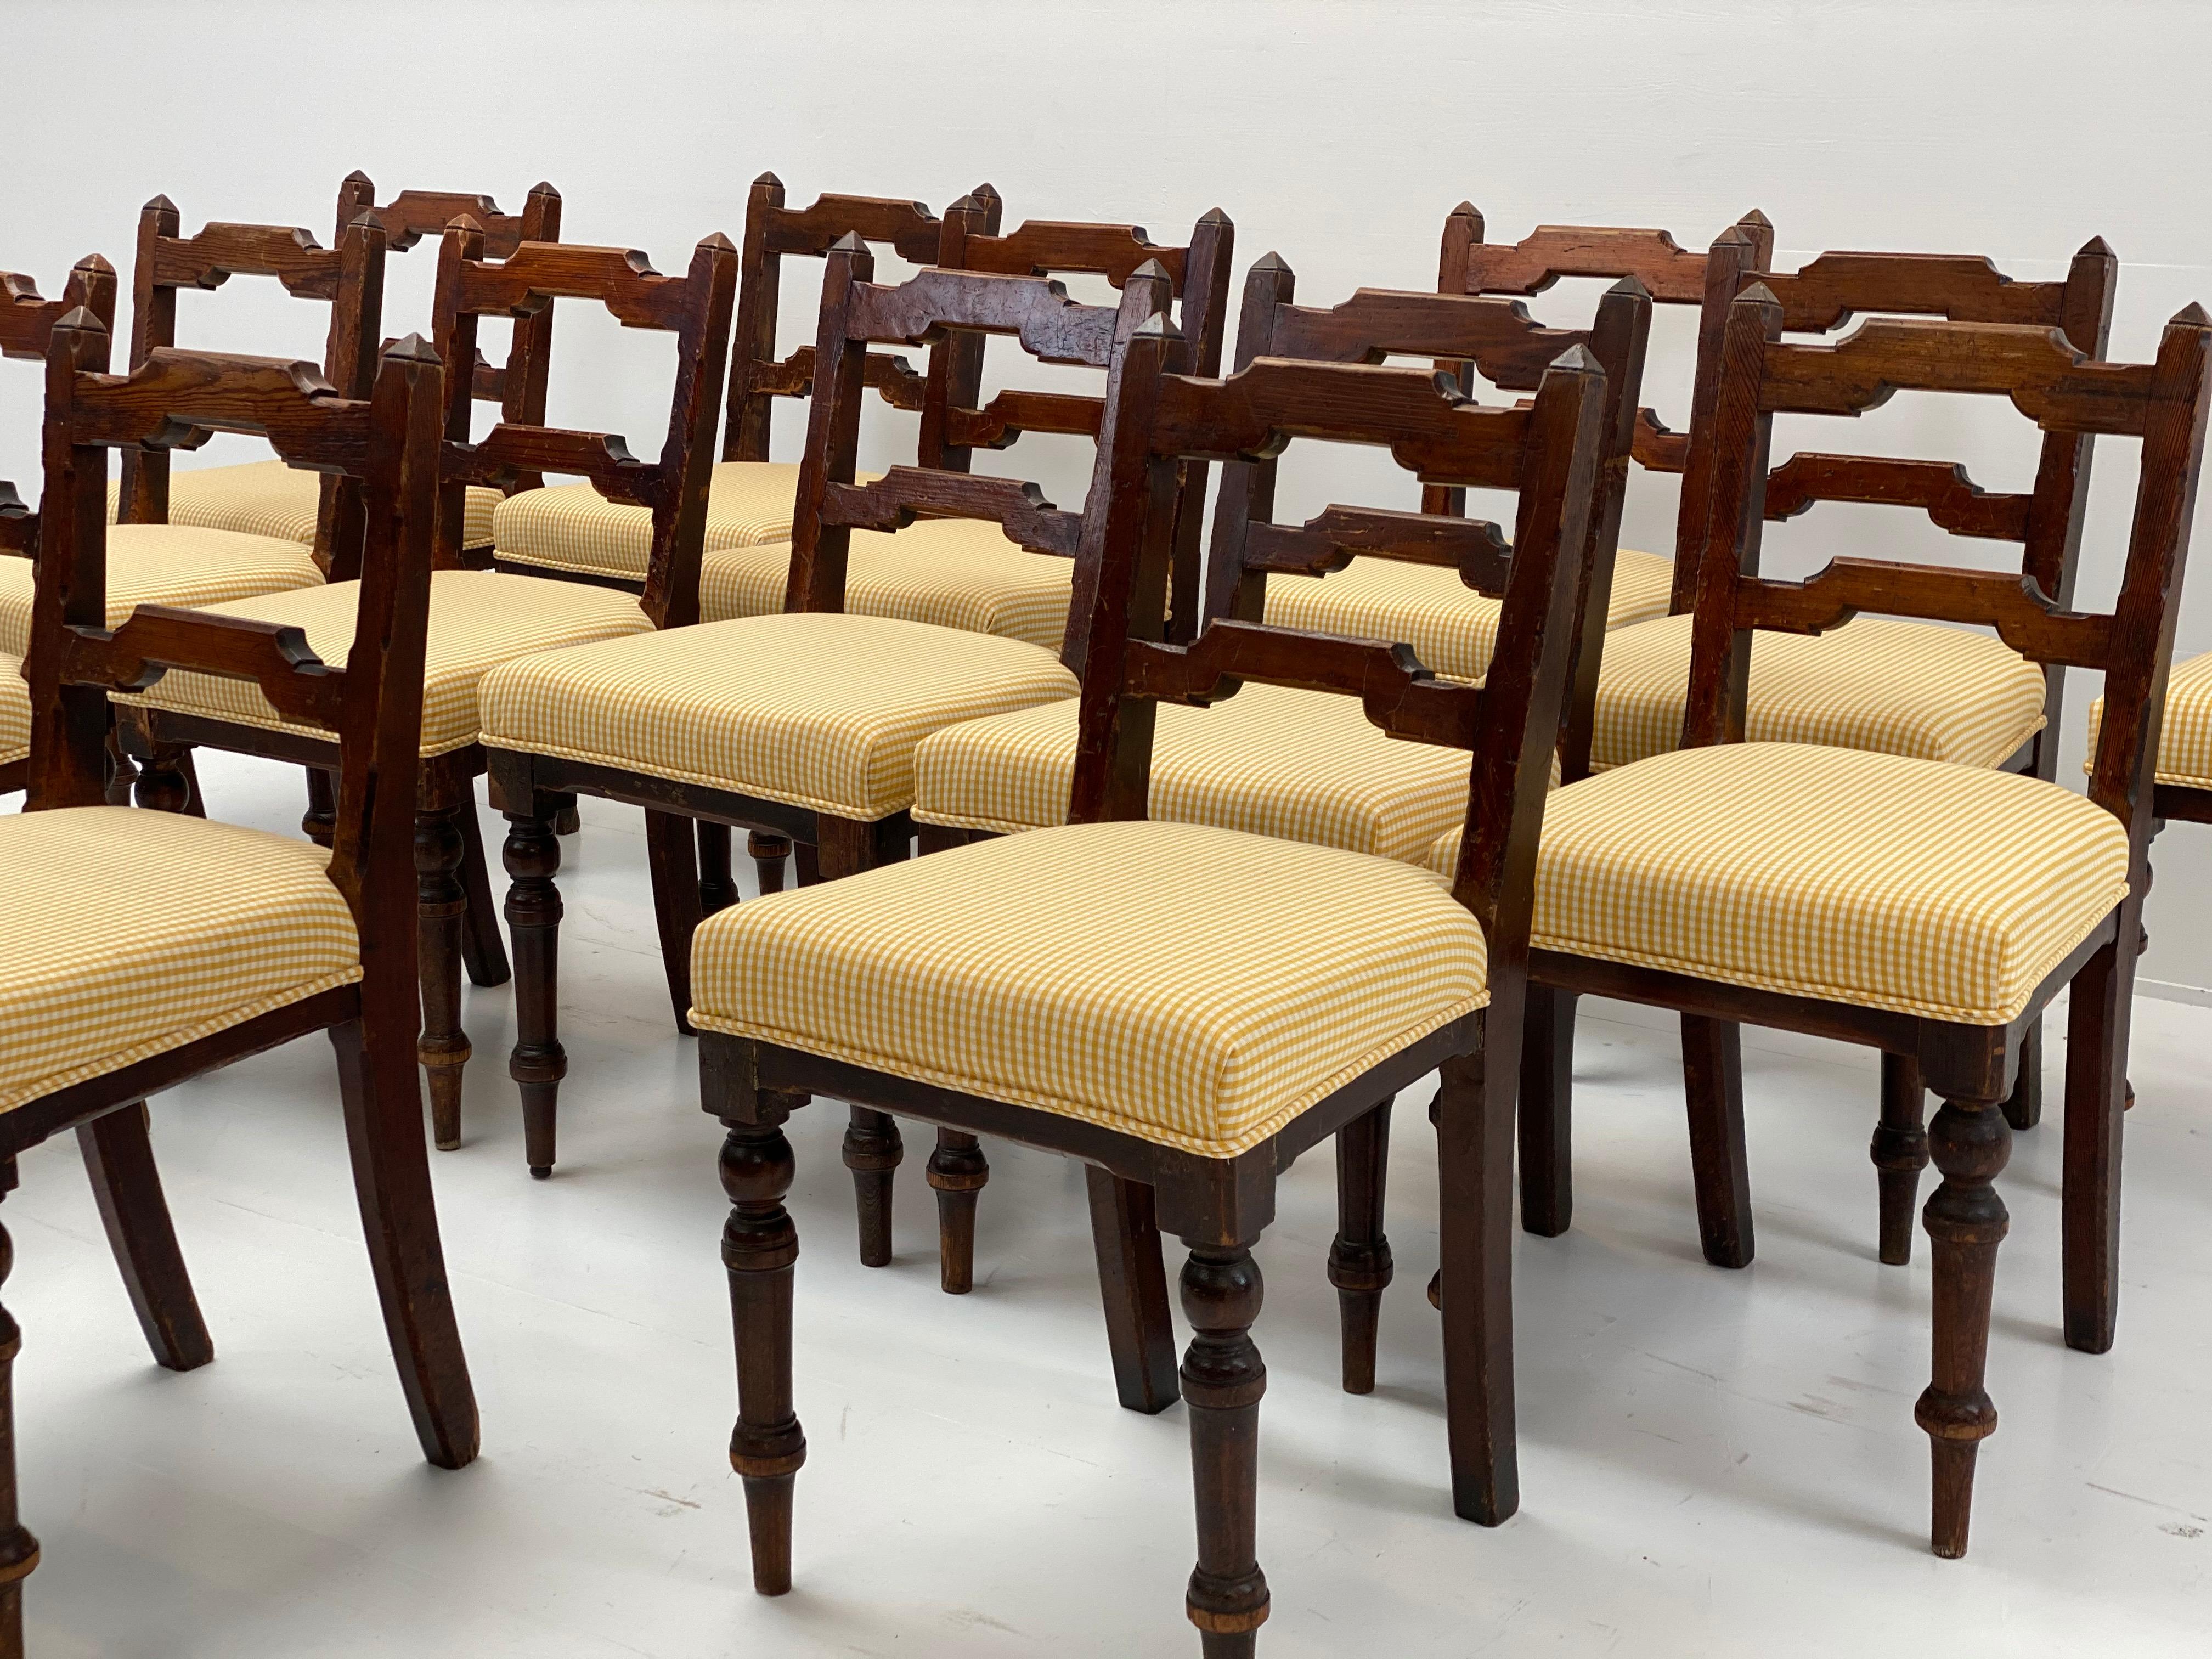 Exceptional set of 14 Irish Country chairs,
simple silhouette with lovely color and strong, old patina,
sturdy good condition
chairs with elegant lines and stunning wood
new upholstery, elegant white and yellow Vichy fabric
Very unusual to find